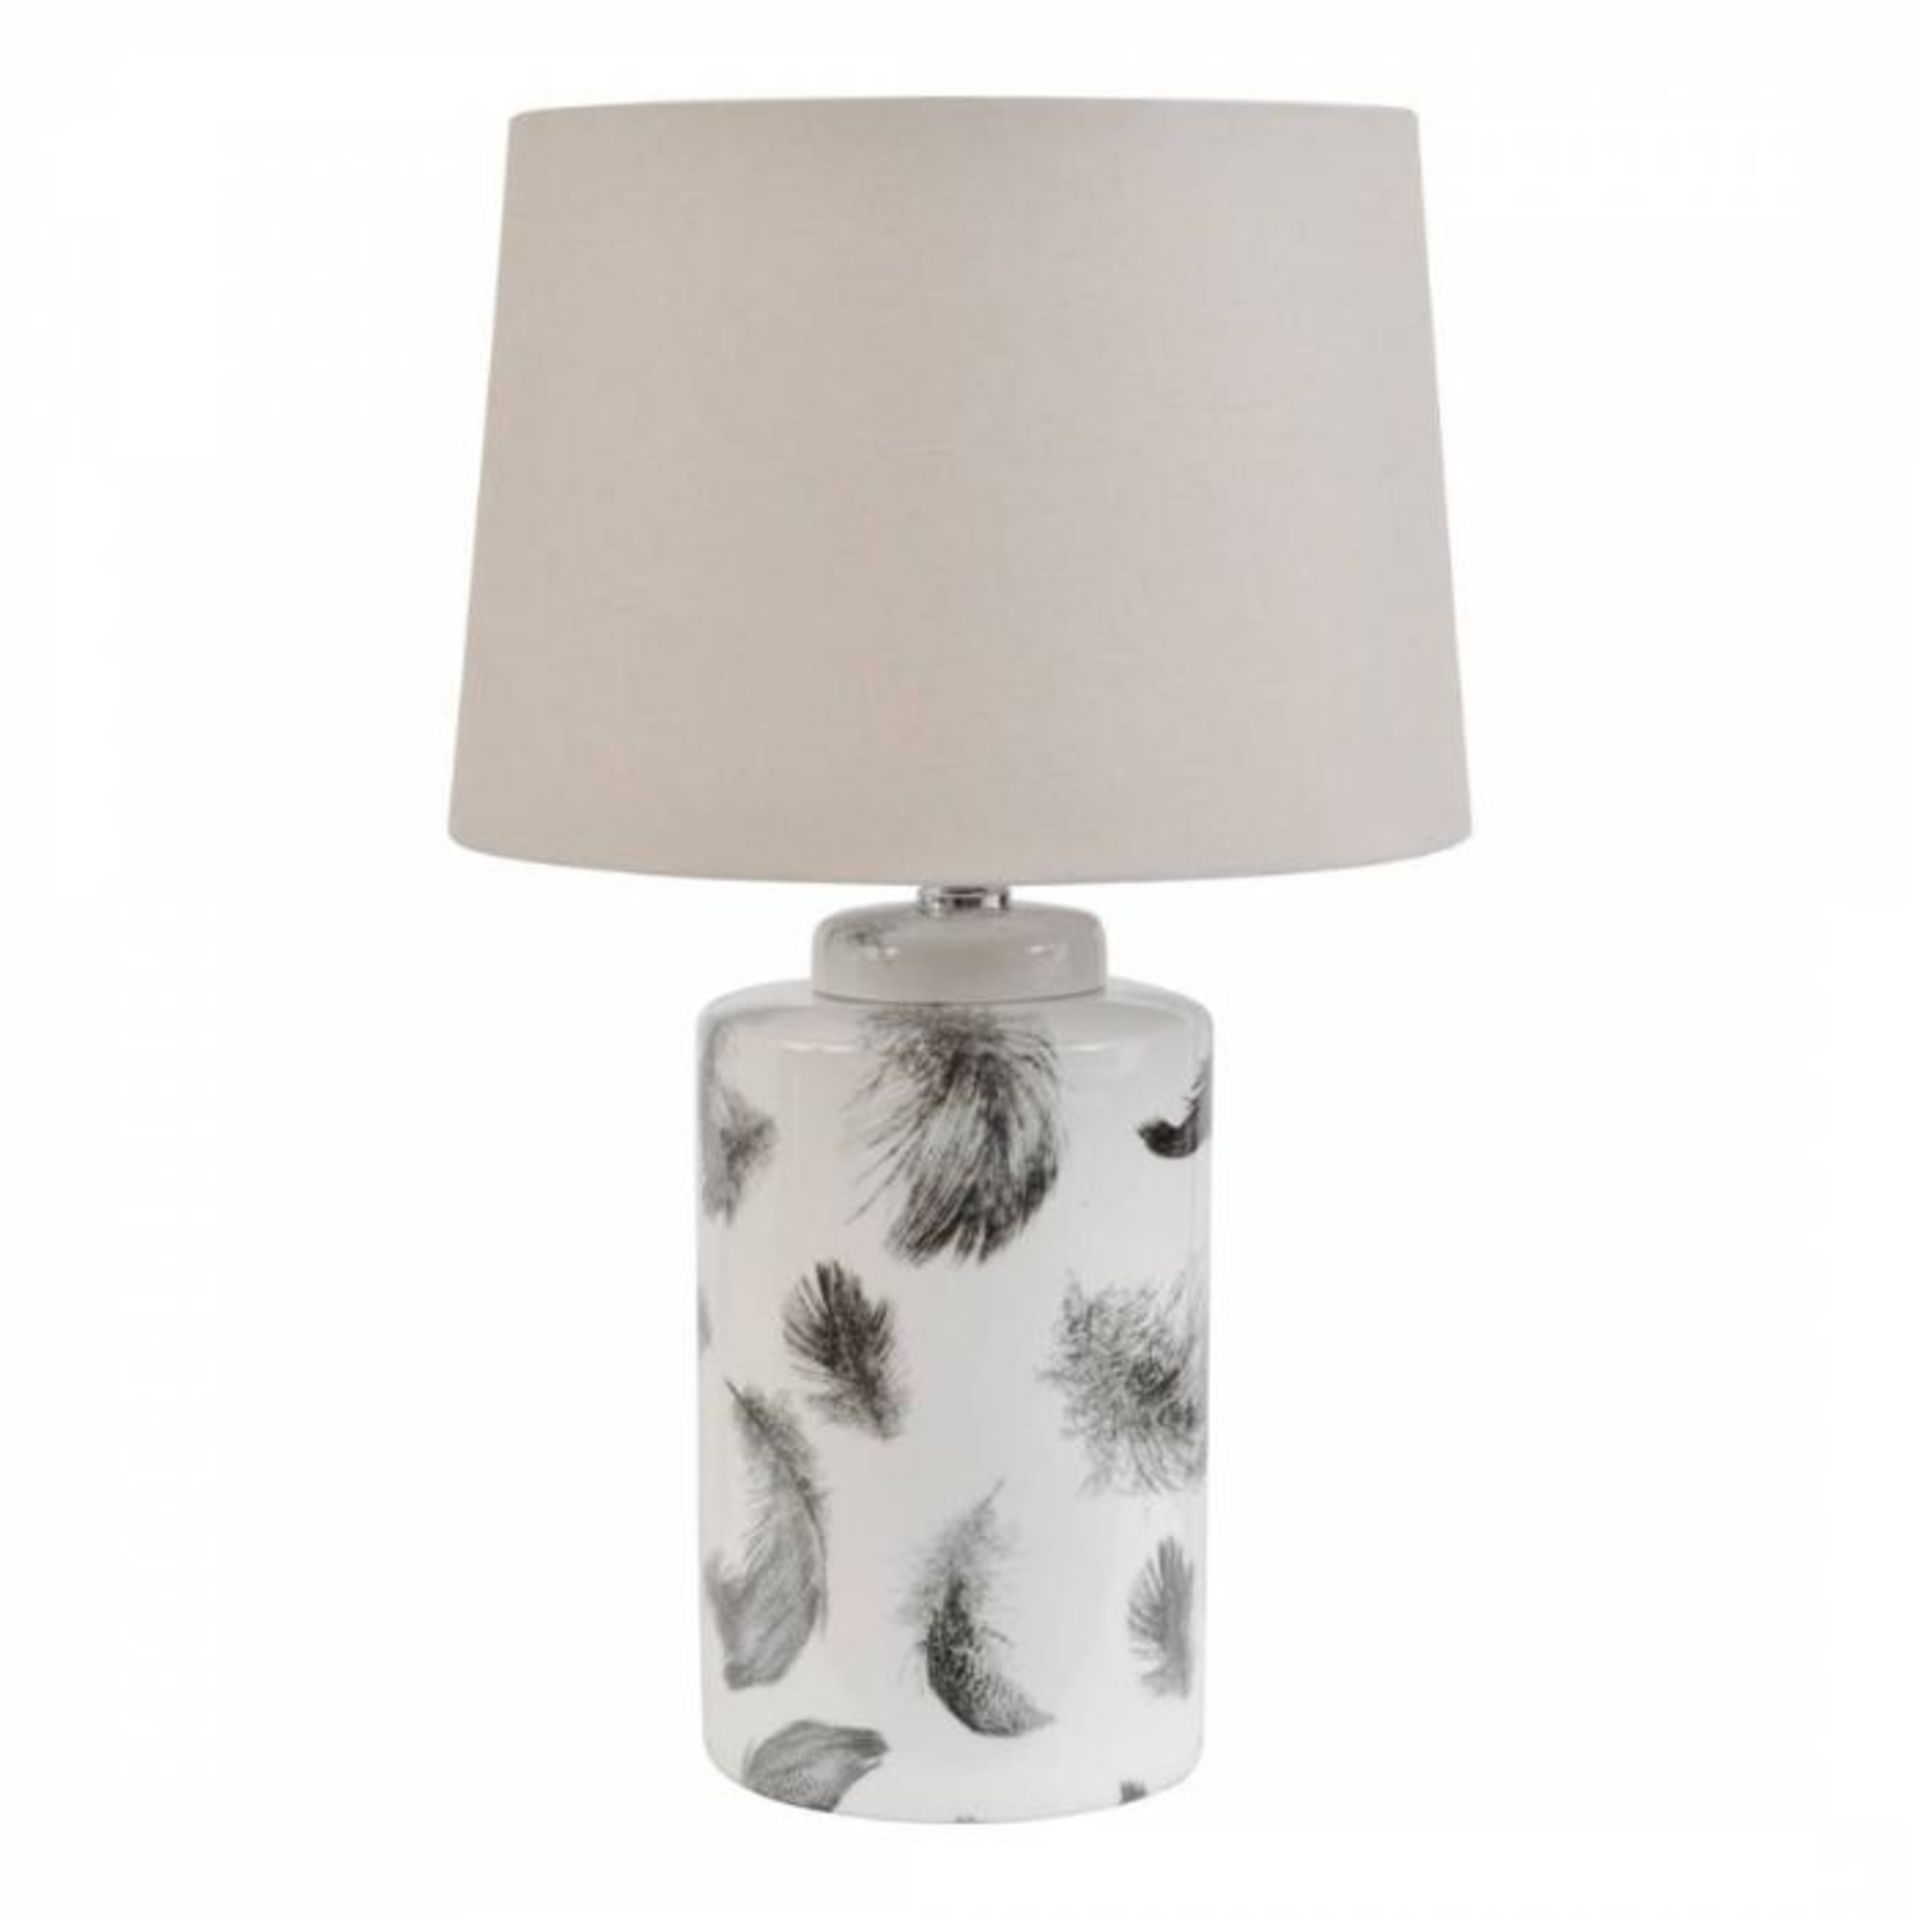 John Piper Floating Feathers Cotton Lamp Shade (GREY) (45cm) (SHADE ONLY BASE NOT INCLUDED) (461/10